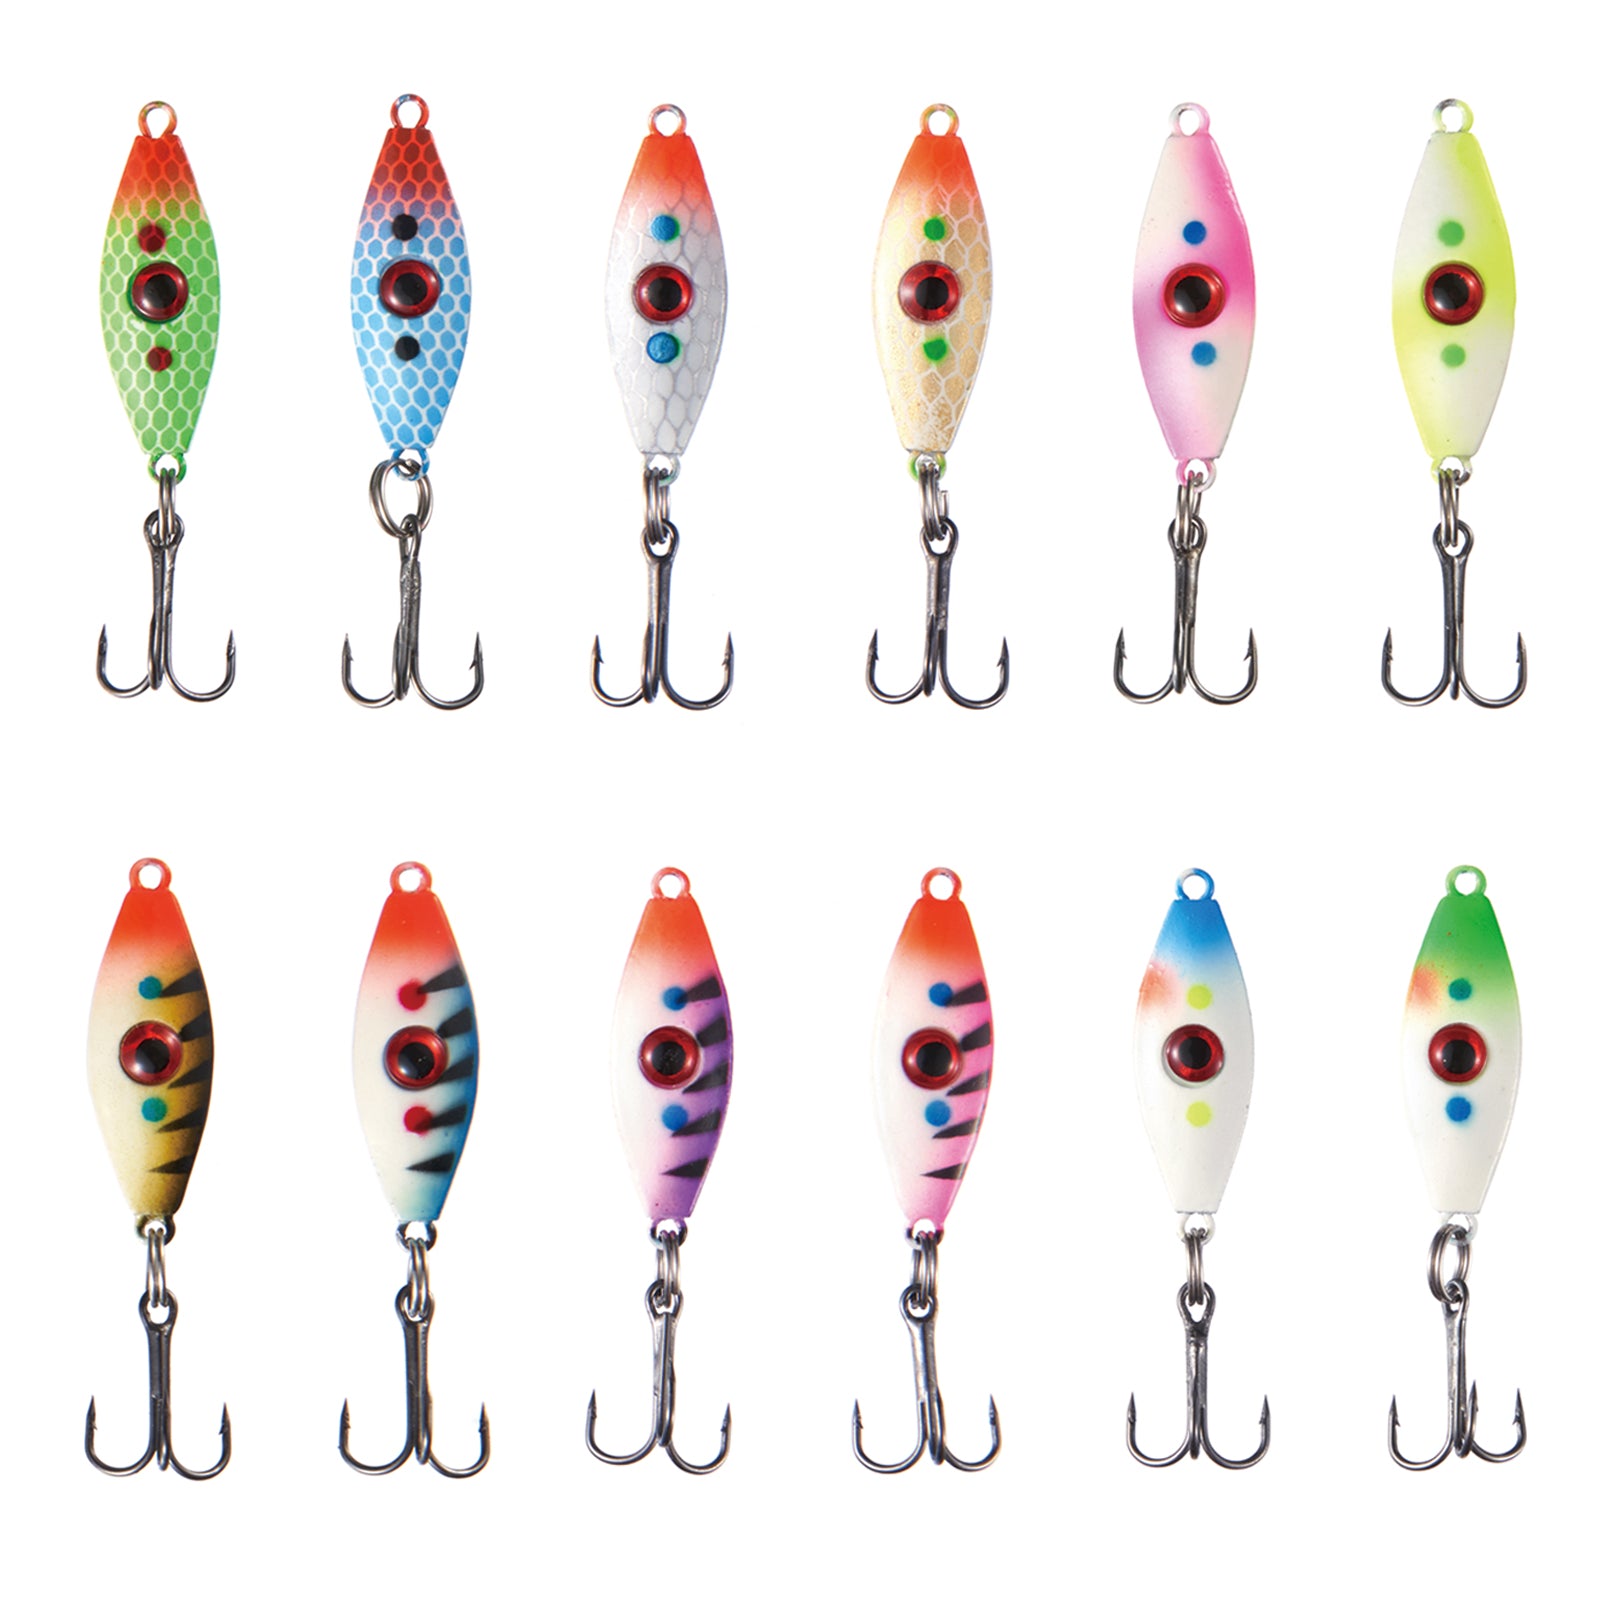 16 NEW Hi-Tech Fishing Ice Jig ASSORTED GLOW LURES COLORS-SIZES